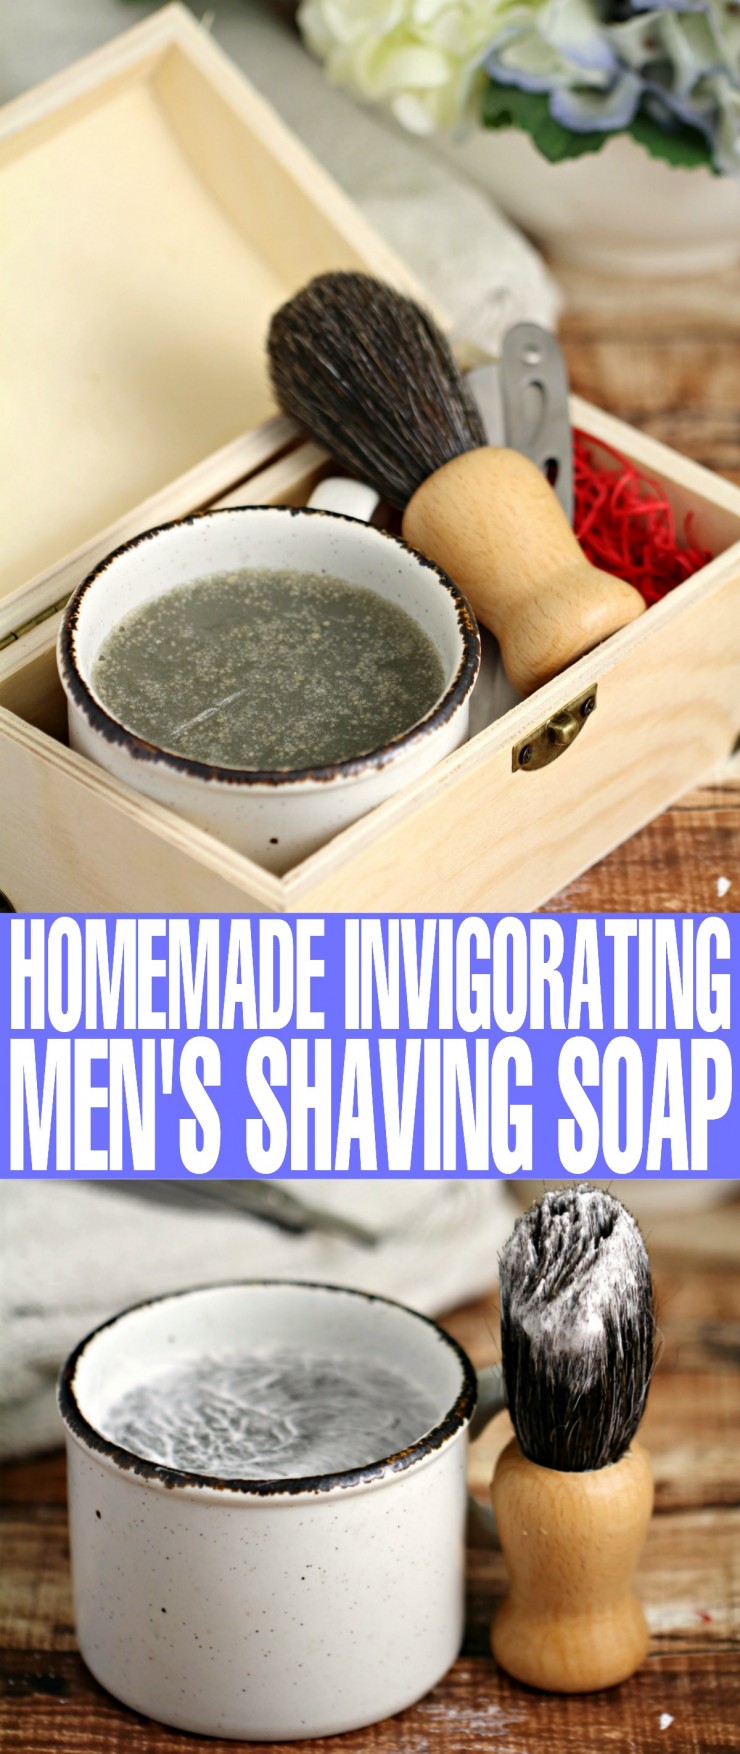 Every morning is a good morning with this Homemade Invigorating Men's Shaving Soap! The bright citrus scent is the perfect way to start the day, and it makes for a great Father's day or Christmas gift for any man in your life.